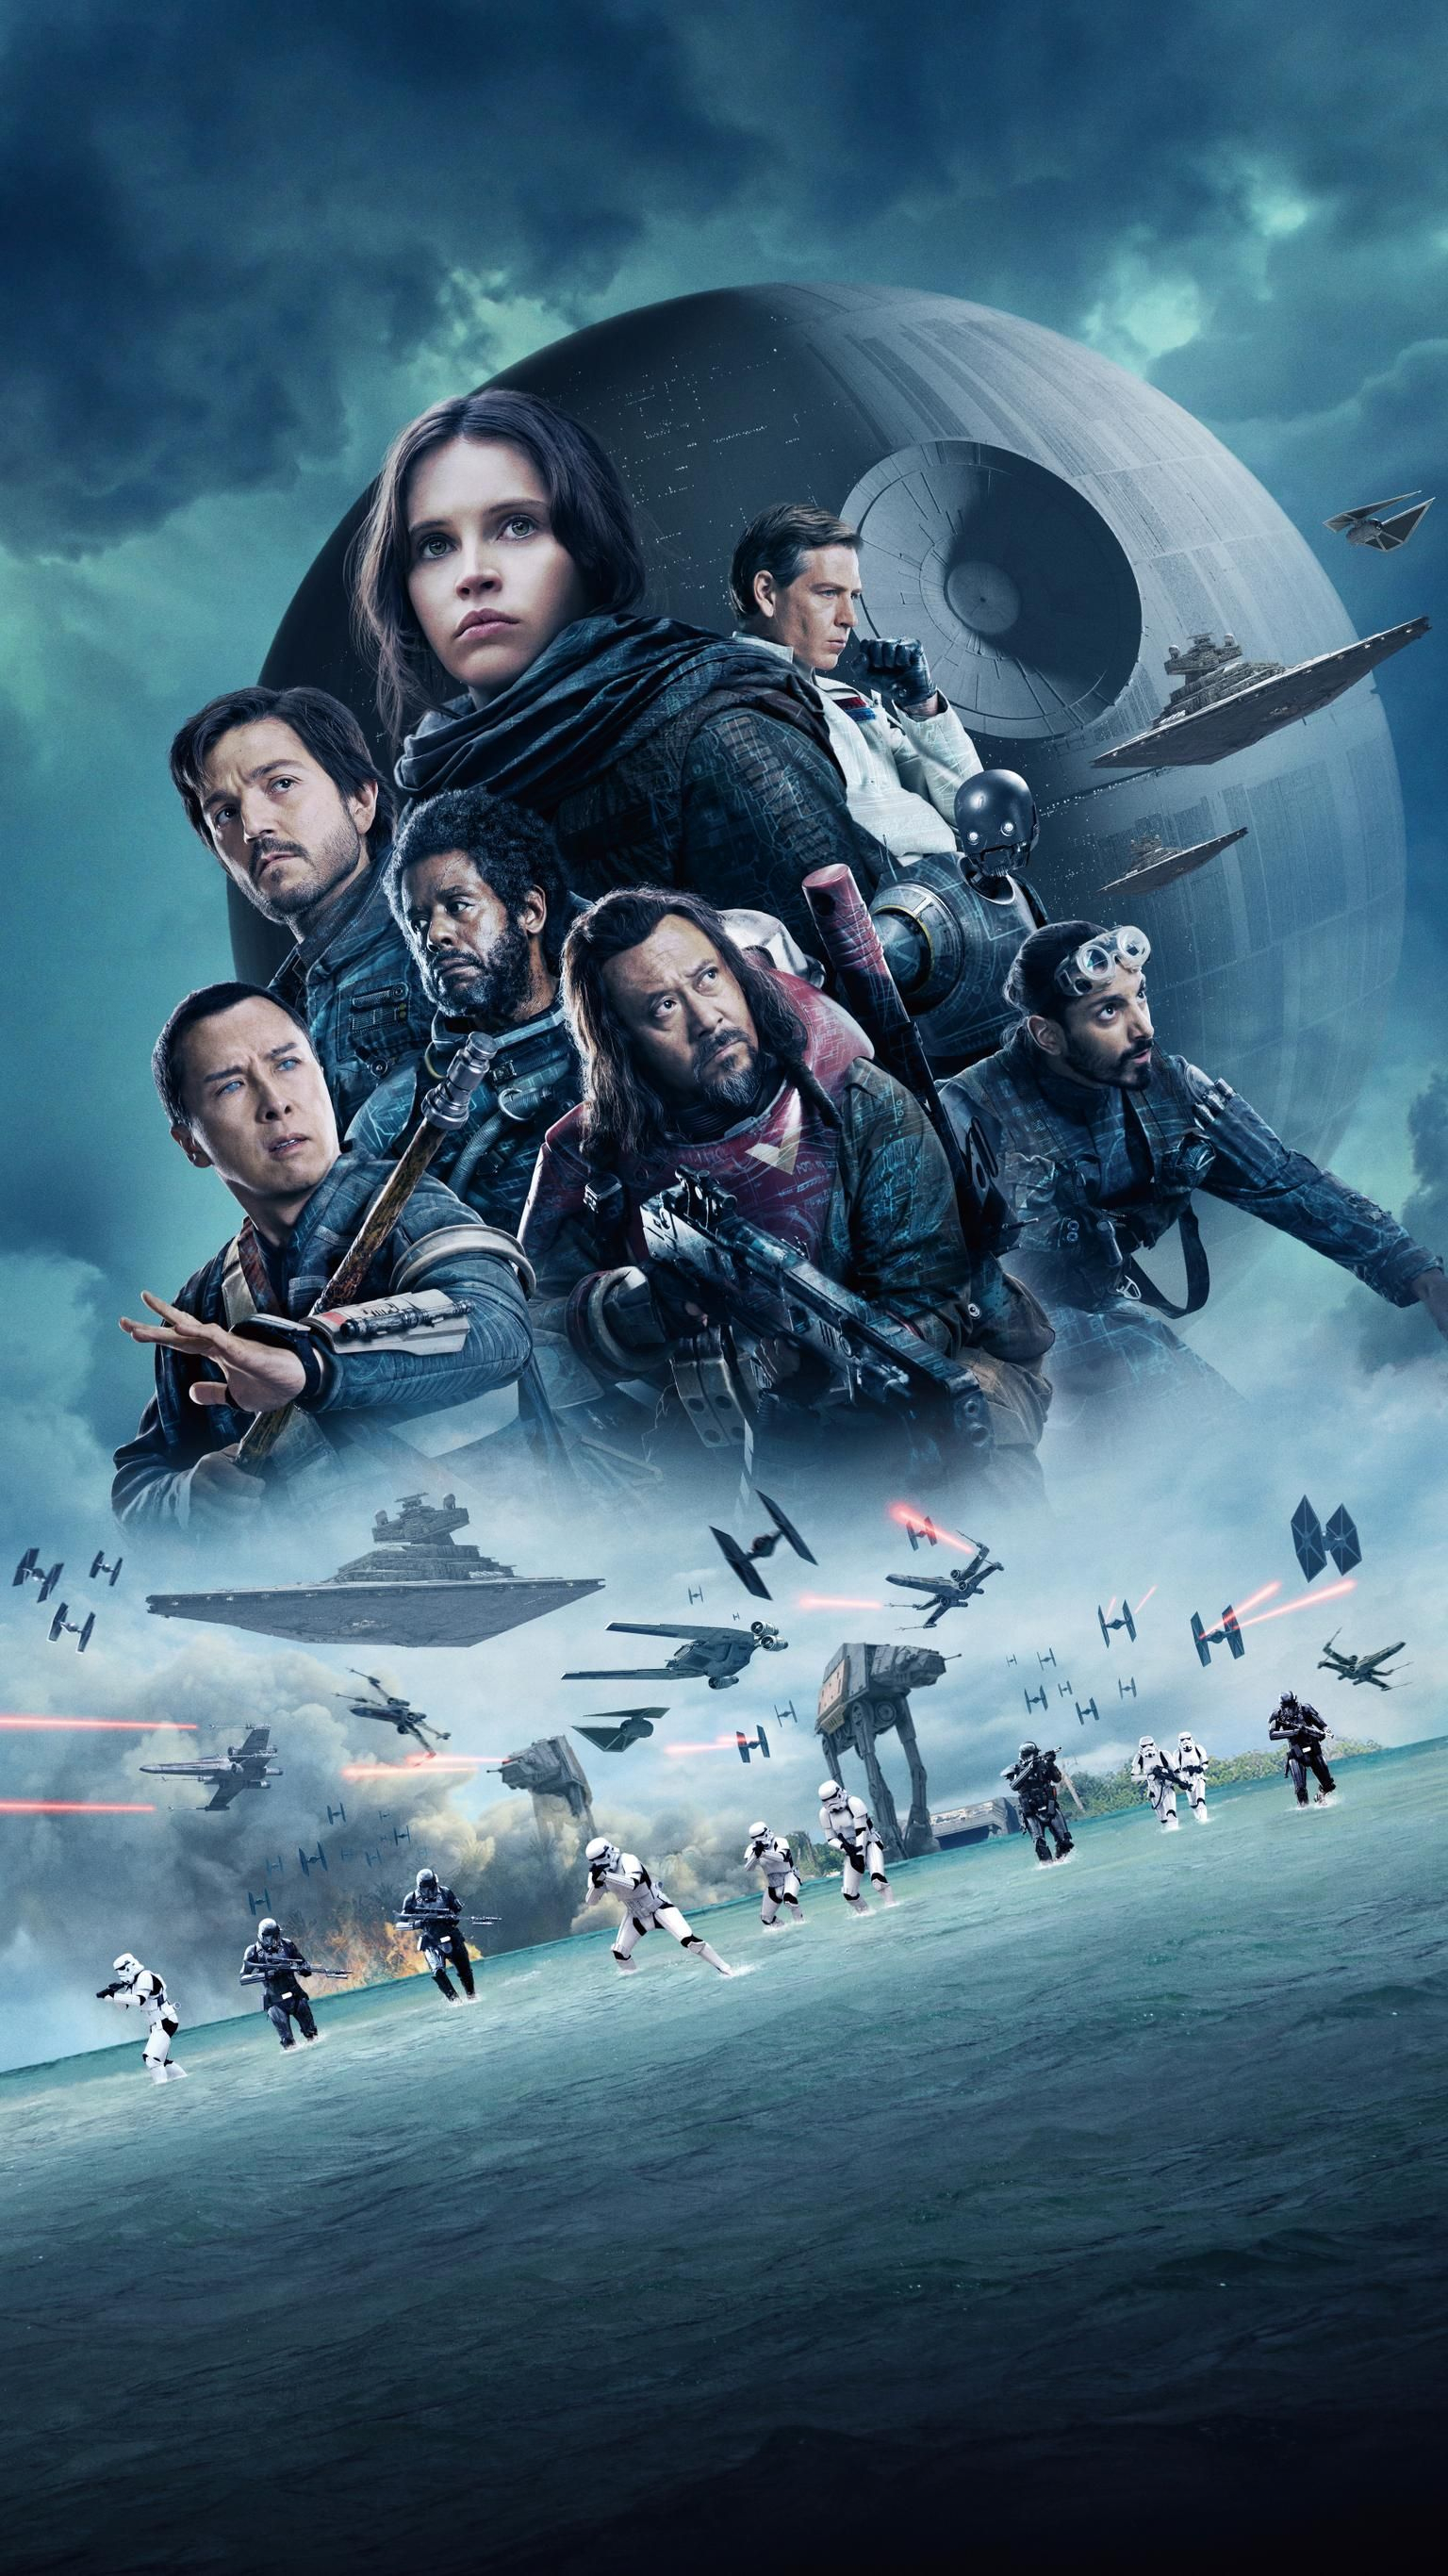 1536x2732 Rogue One: A Star Wars Story (2016) Phone Wallpaper | Moviemania | Rogue one star wars, Star wars poster, Star wars images